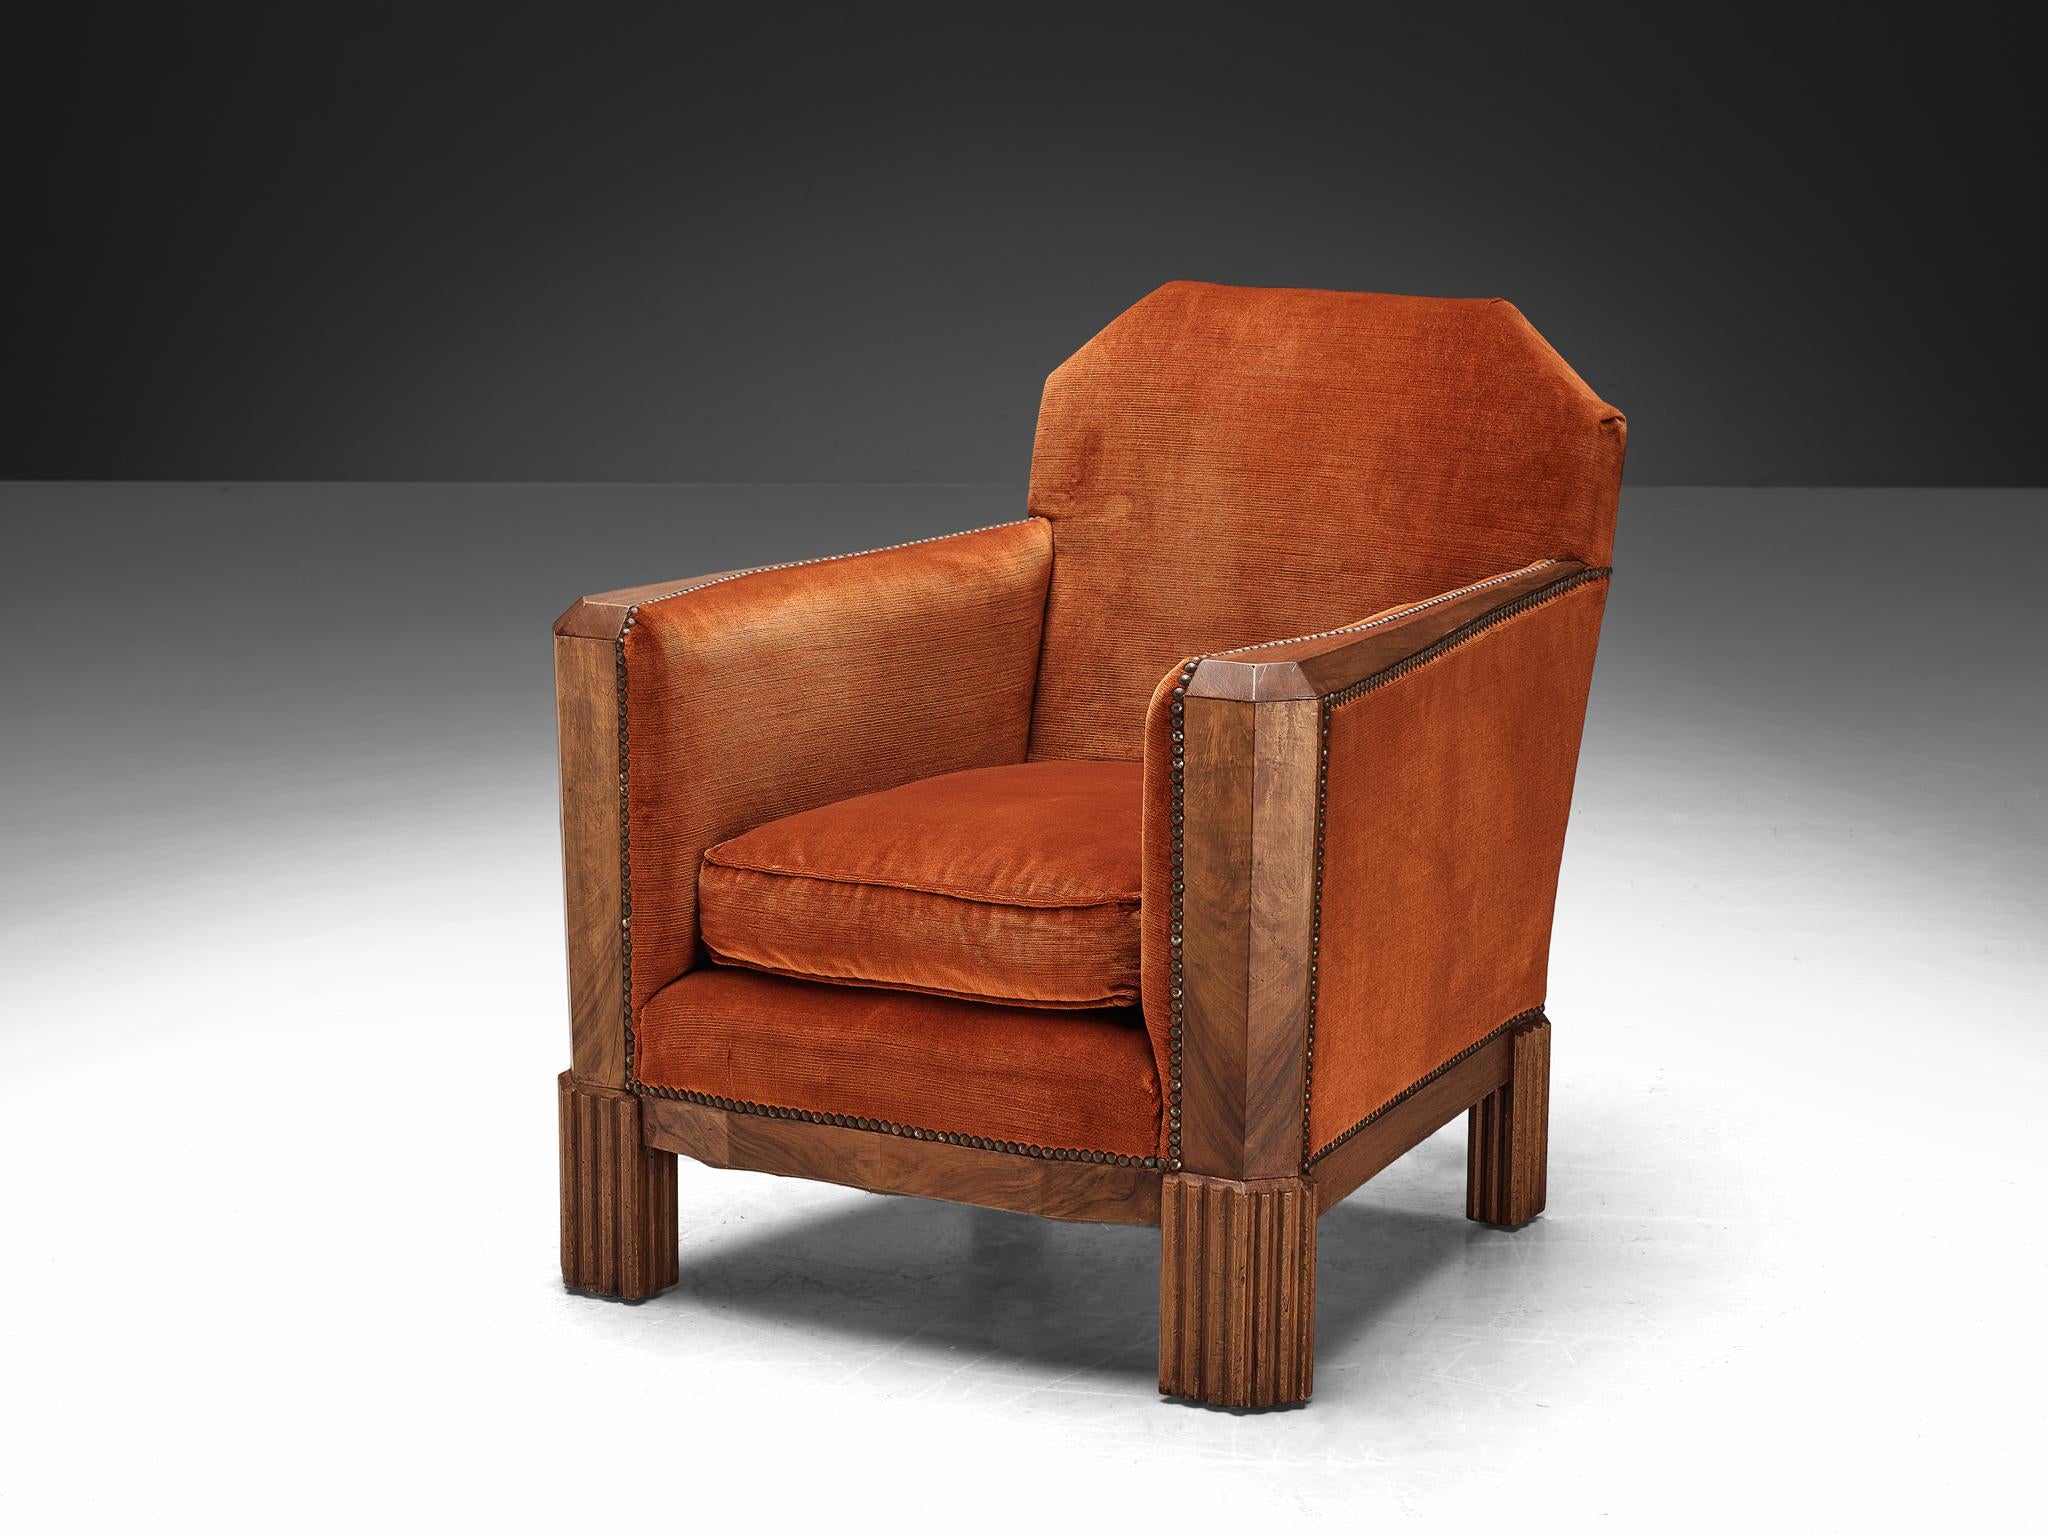 French Art Deco Pair of Lounge Chairs in Orange Corduroy and Walnut